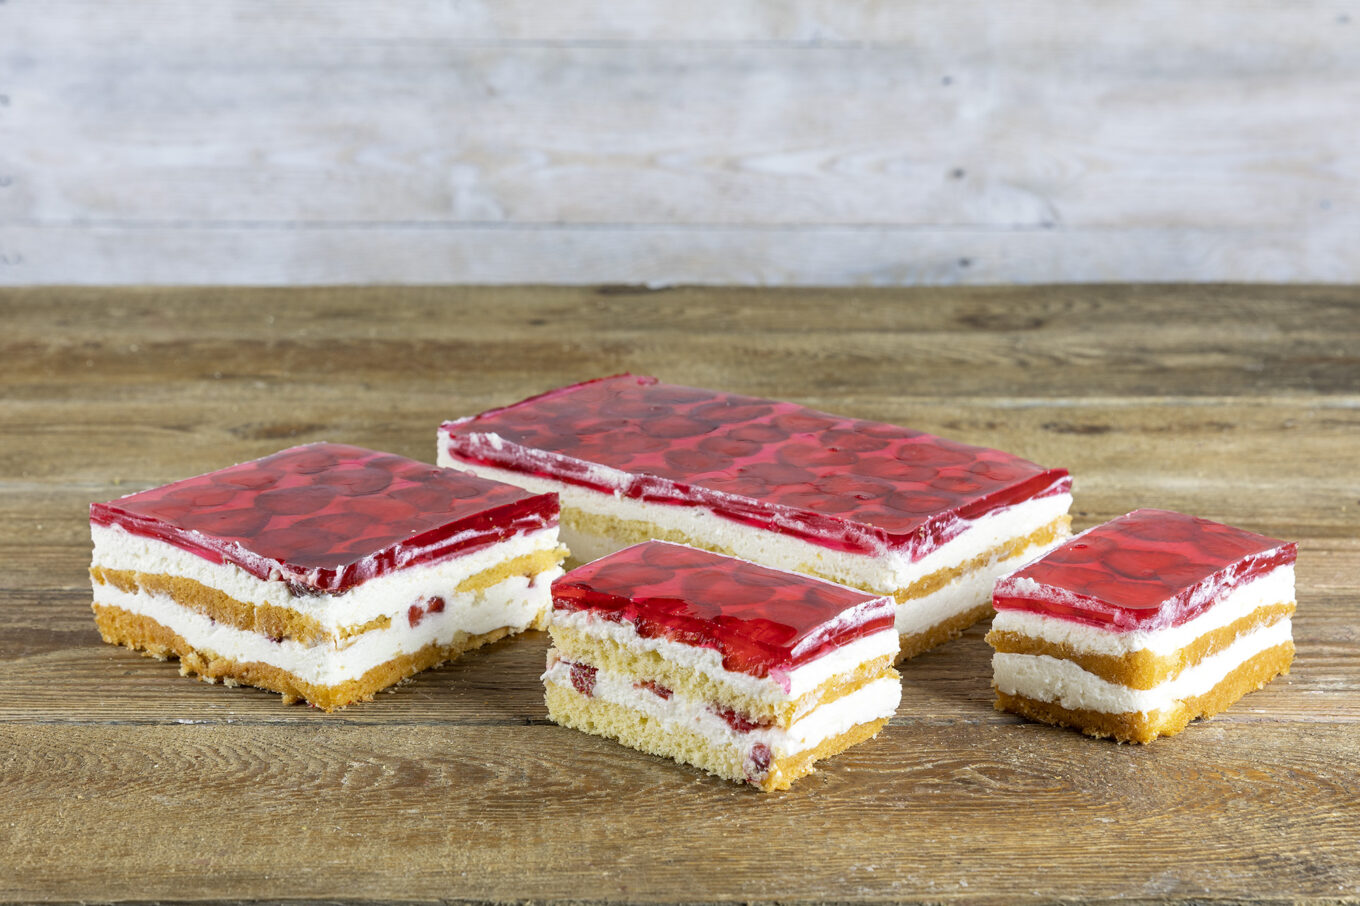 Sponge cake with cream, jelly and fresh strawberries. Jacek Placek confectionery is synonymous with the taste of homemade cakes made from natural products.